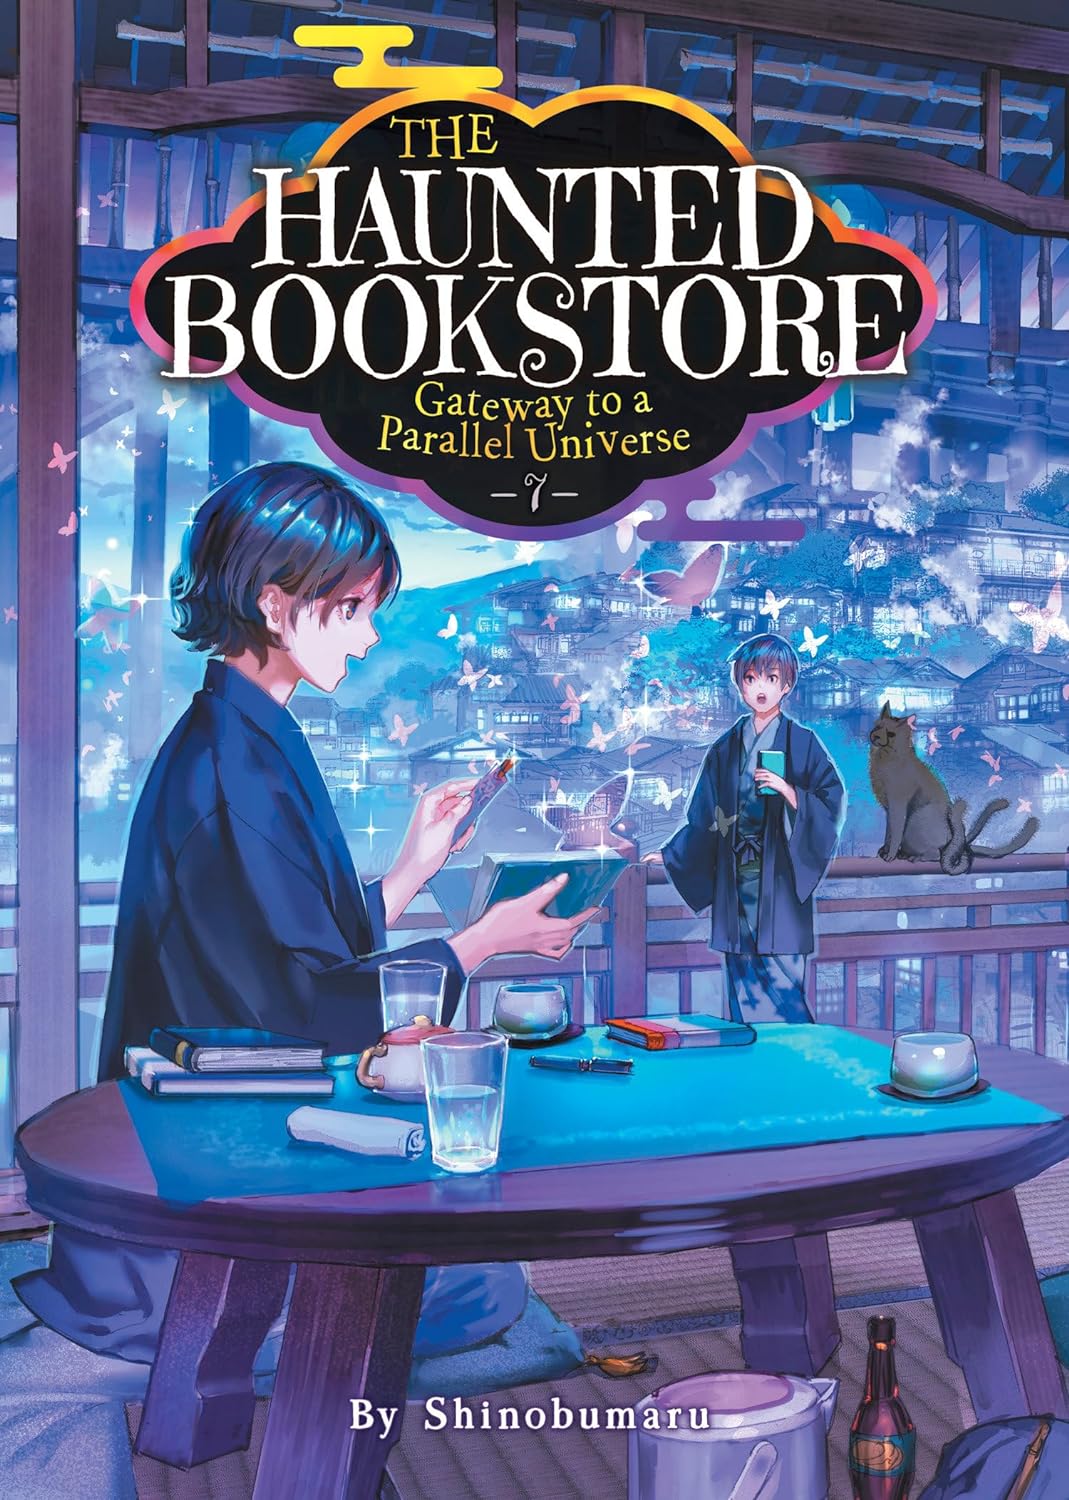 The Haunted Bookstore - Gateway to a Parallel Universe (Light Novel) Vol. 07